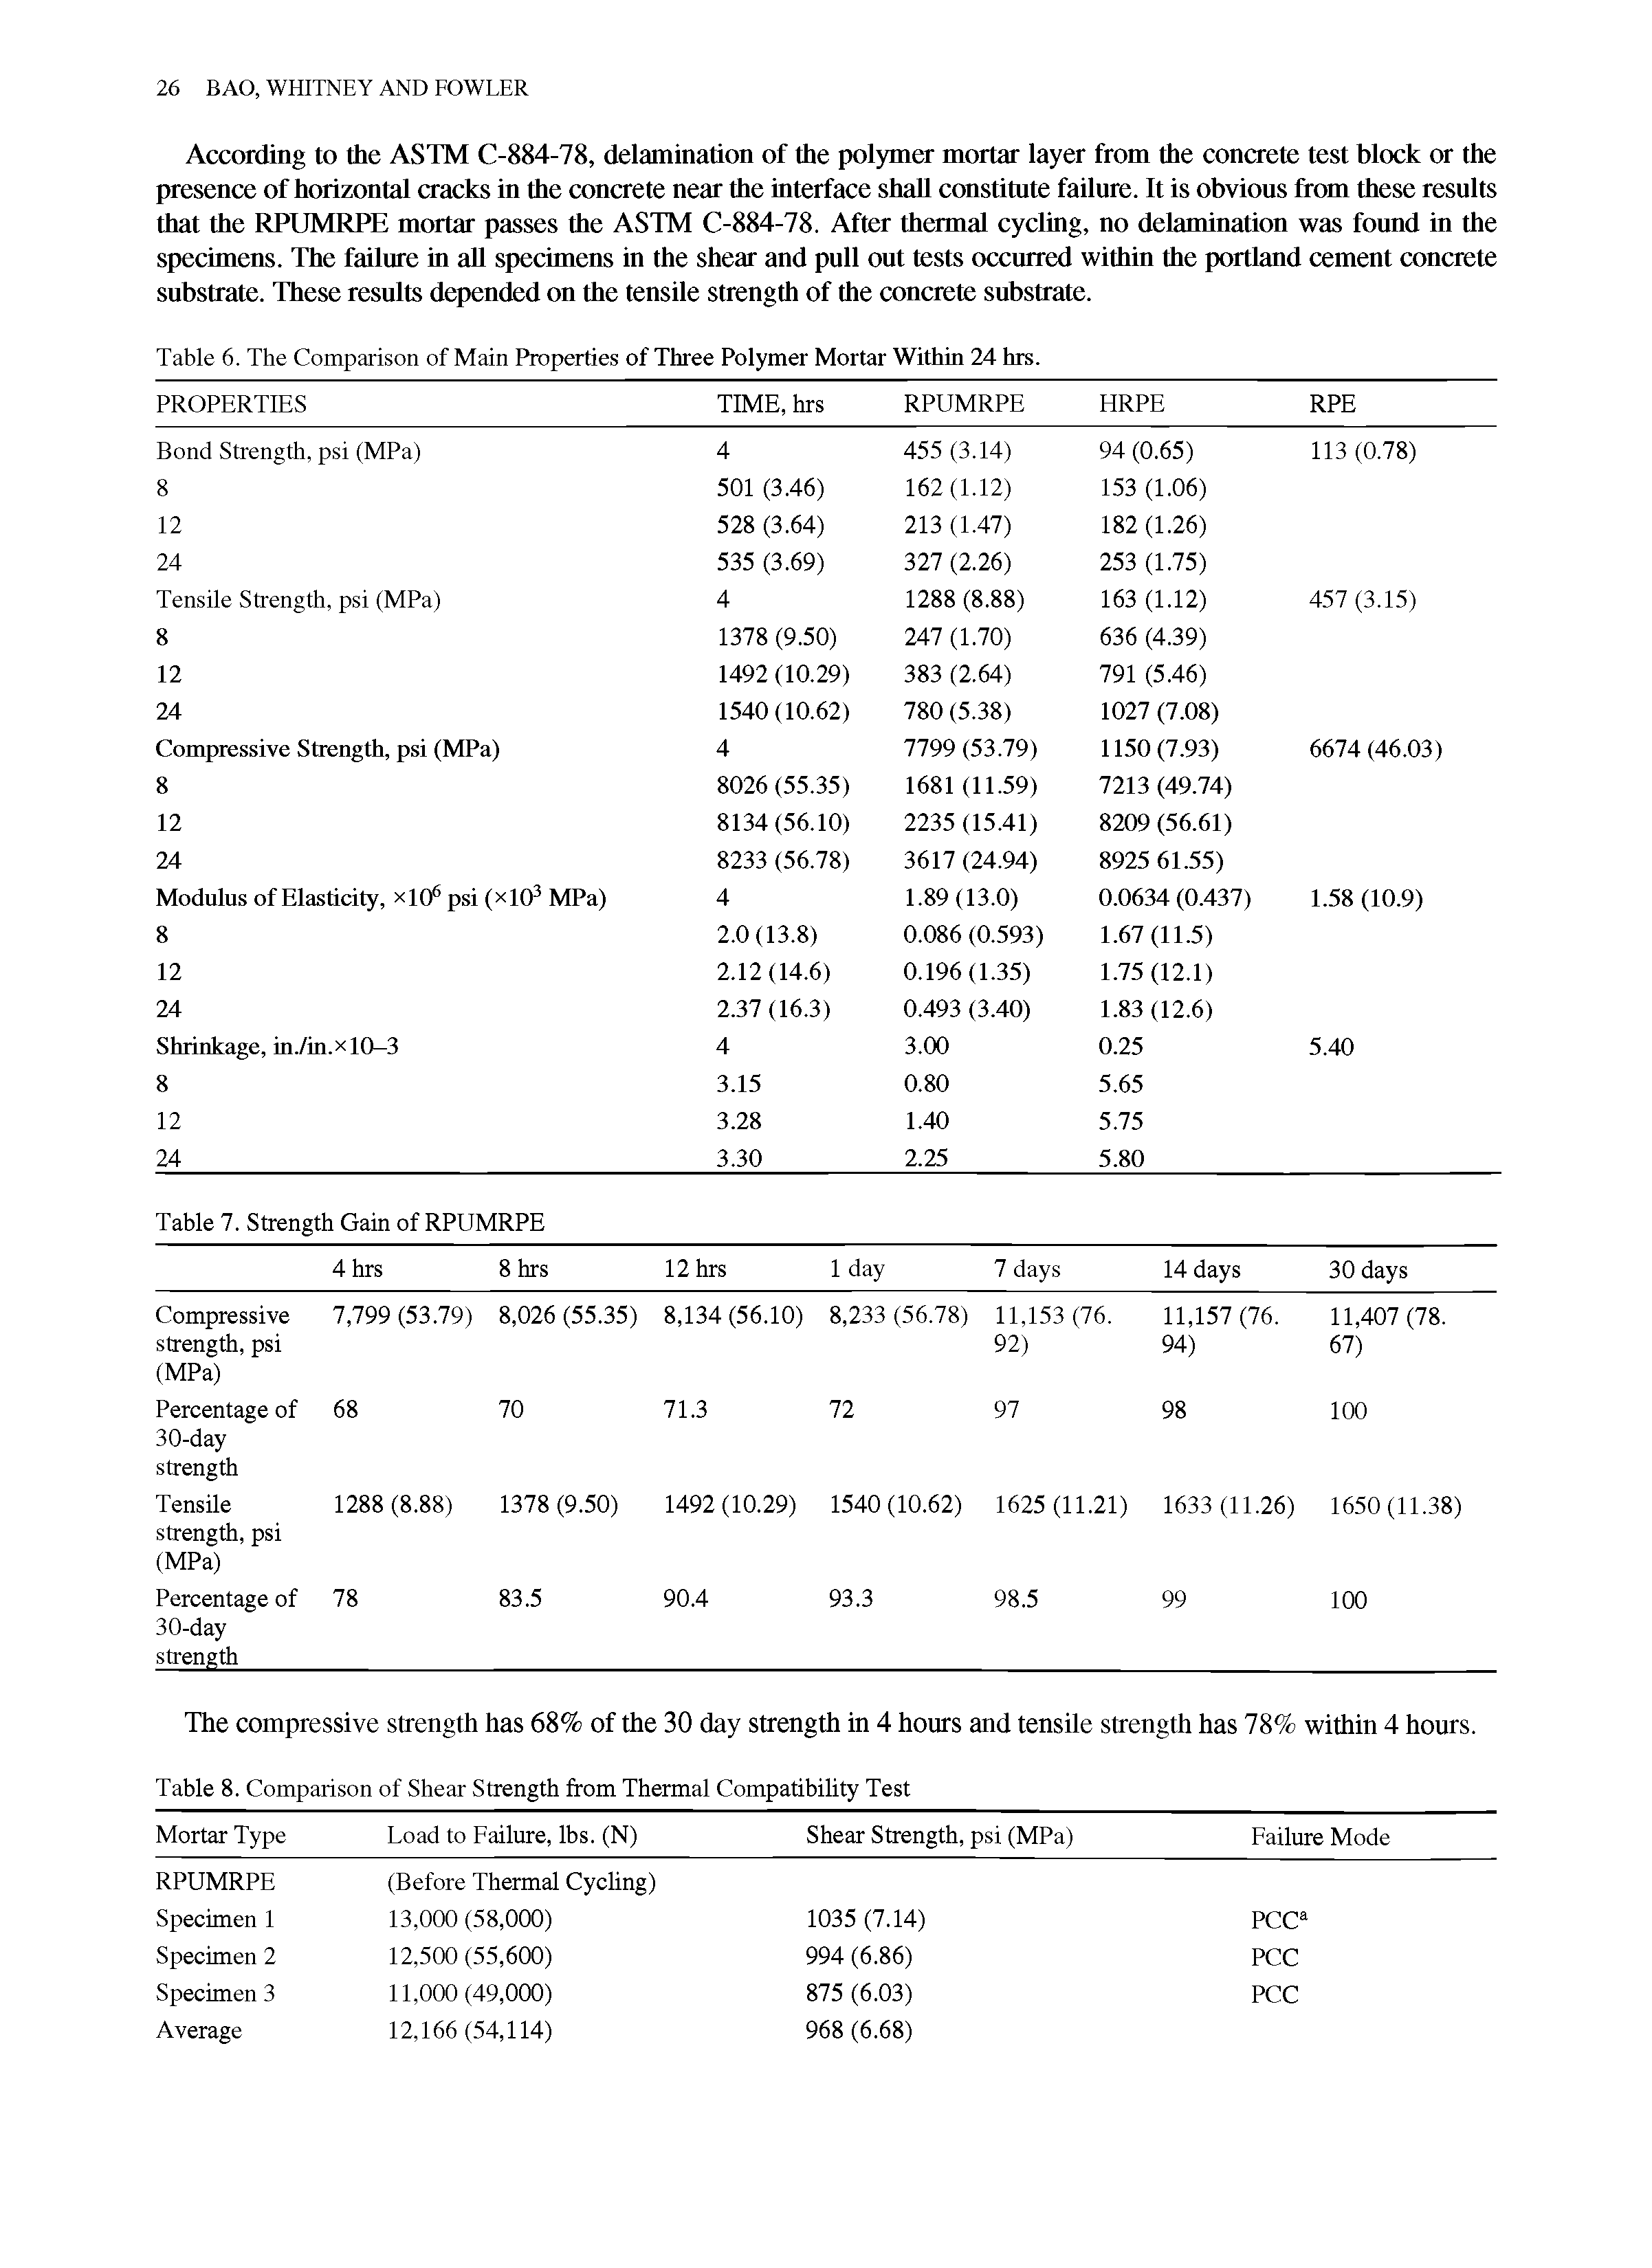 Table 6. The Comparison of Main Properties of Three Polymer Mortar Within 24 hrs.